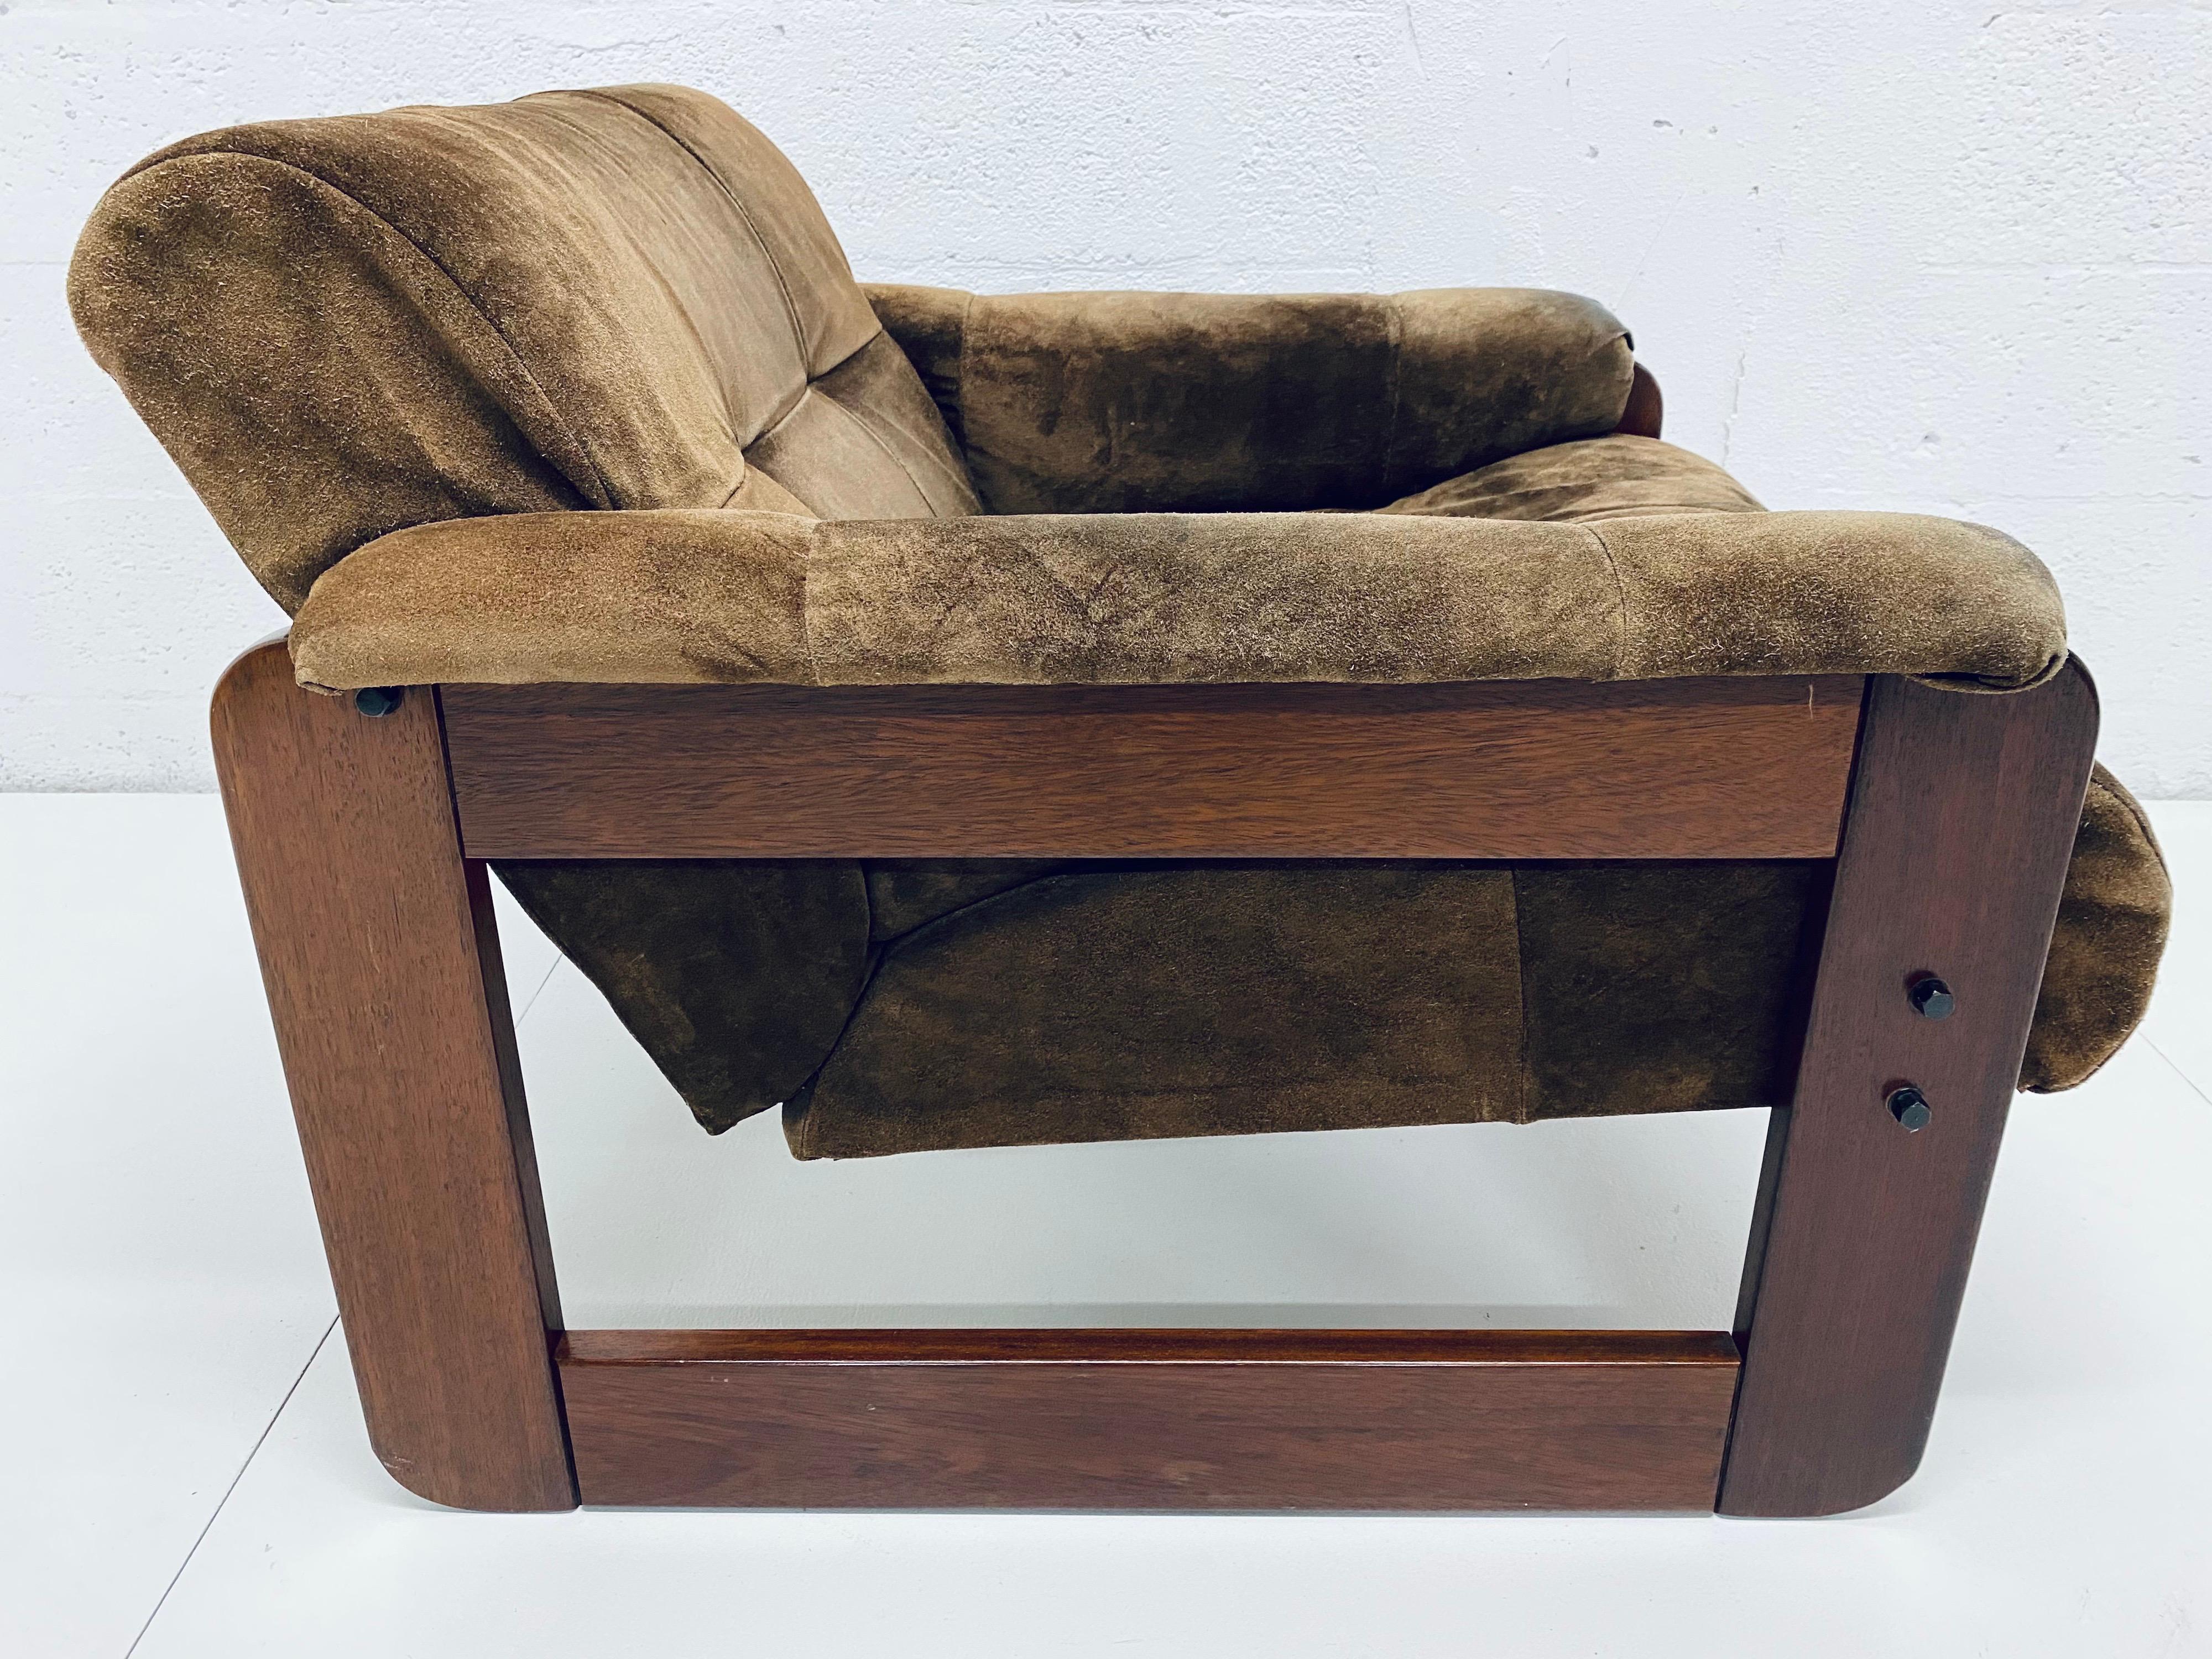 Brown patchwork suede leather over a rosewood frame lounge chair with arms by Percival Lafer, Brazil, 1970s.